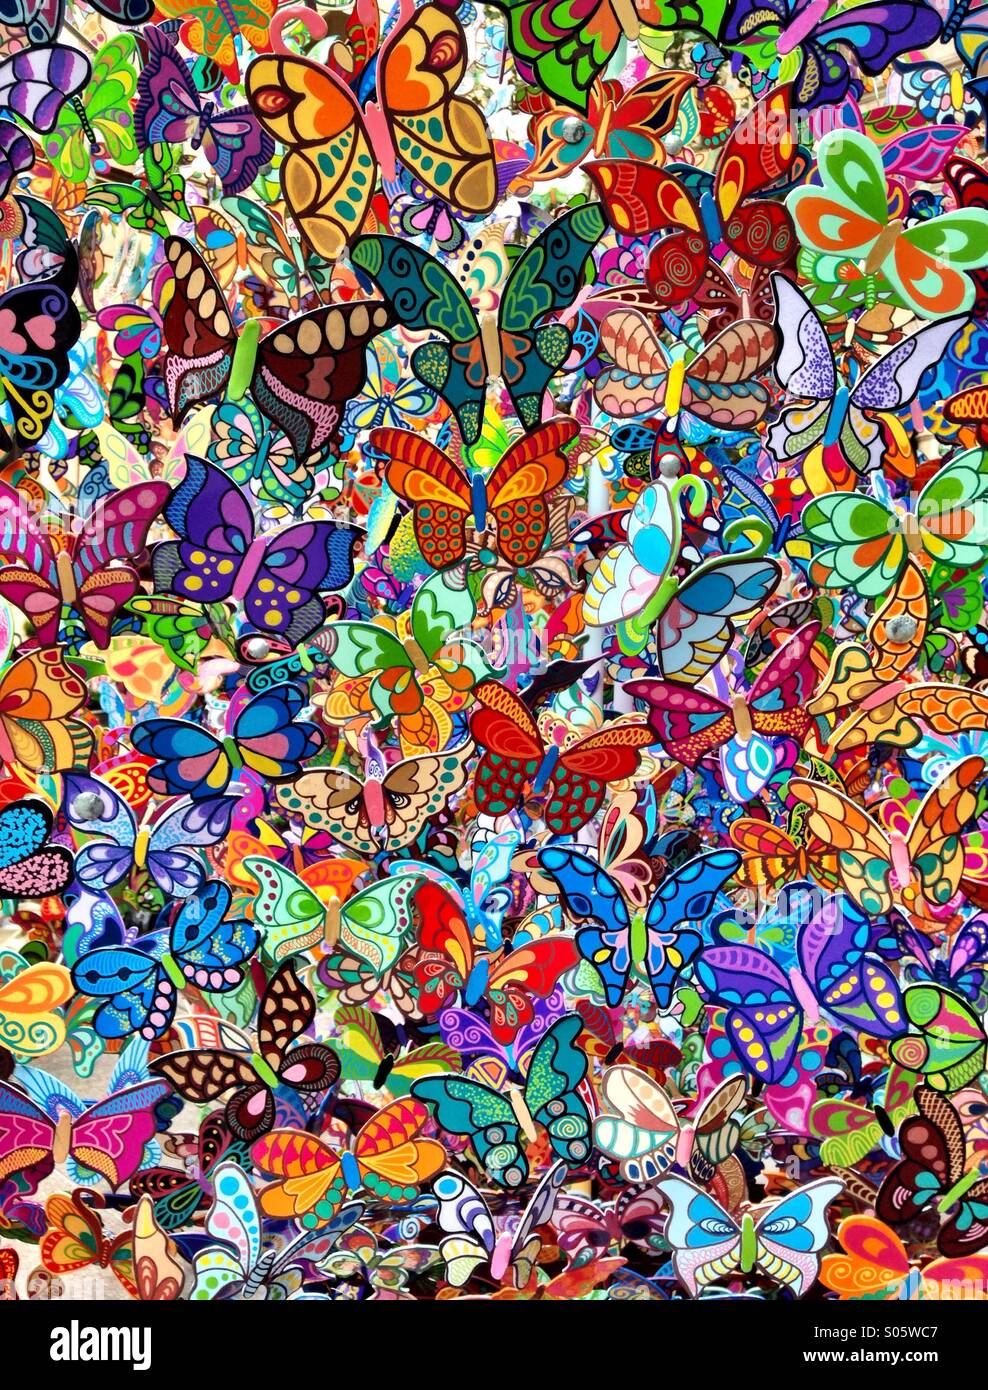 Wallpaper pattern of colorful butterflies Stock Photo